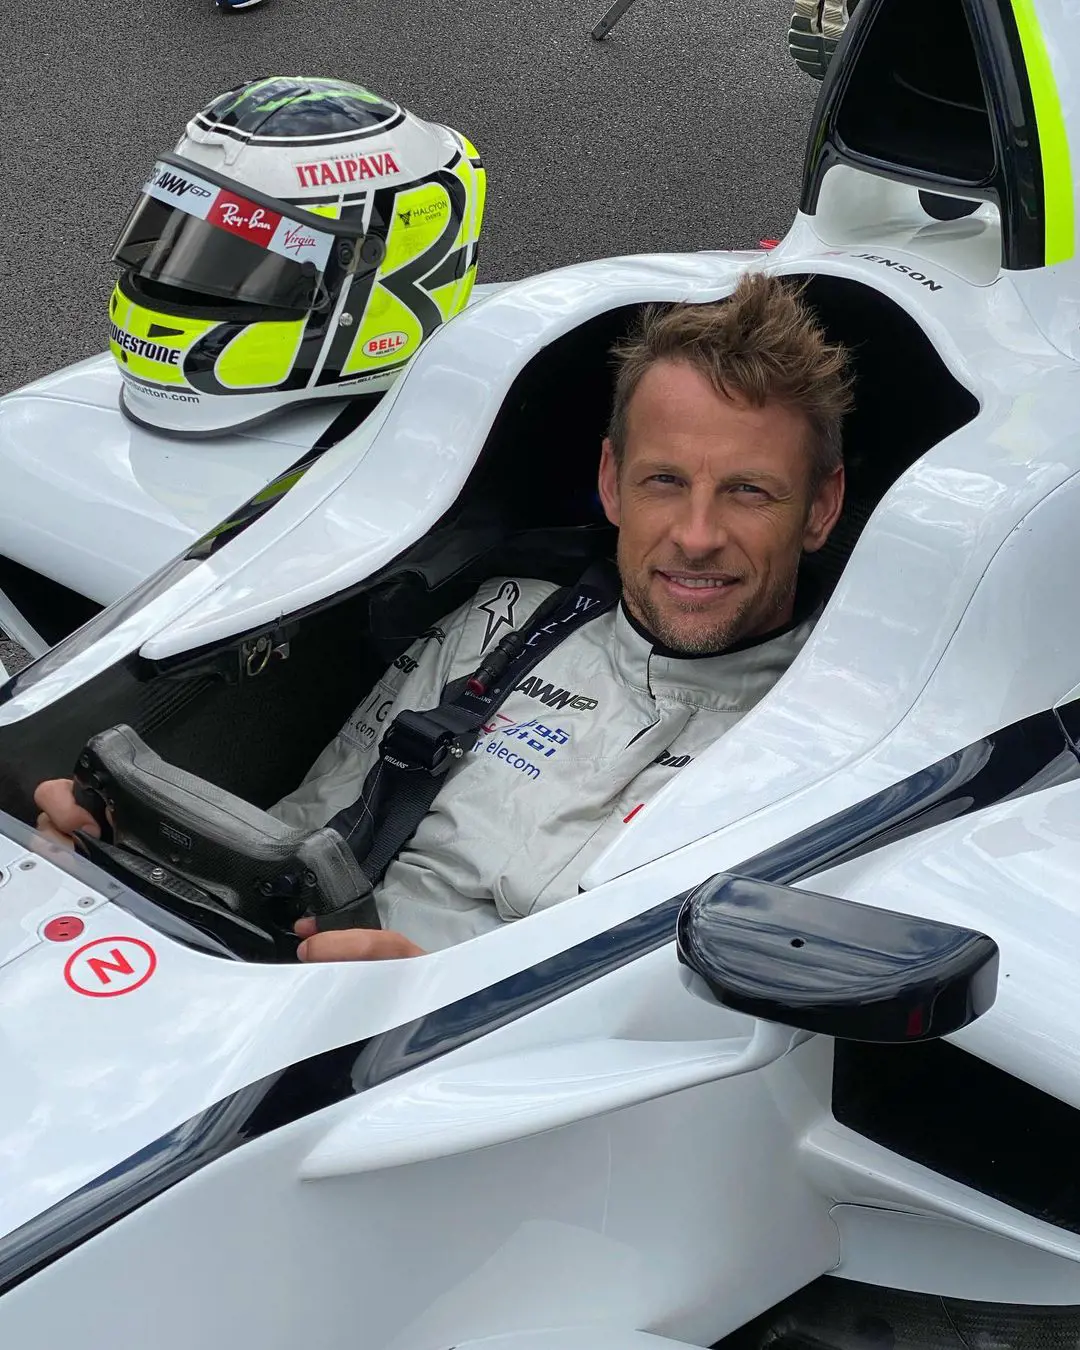 Jenson Button, a racing driver from the United Kingdom who also competed in Formula One, is presently competing in the Japanese Super GT Series for Team Kunimitsu.